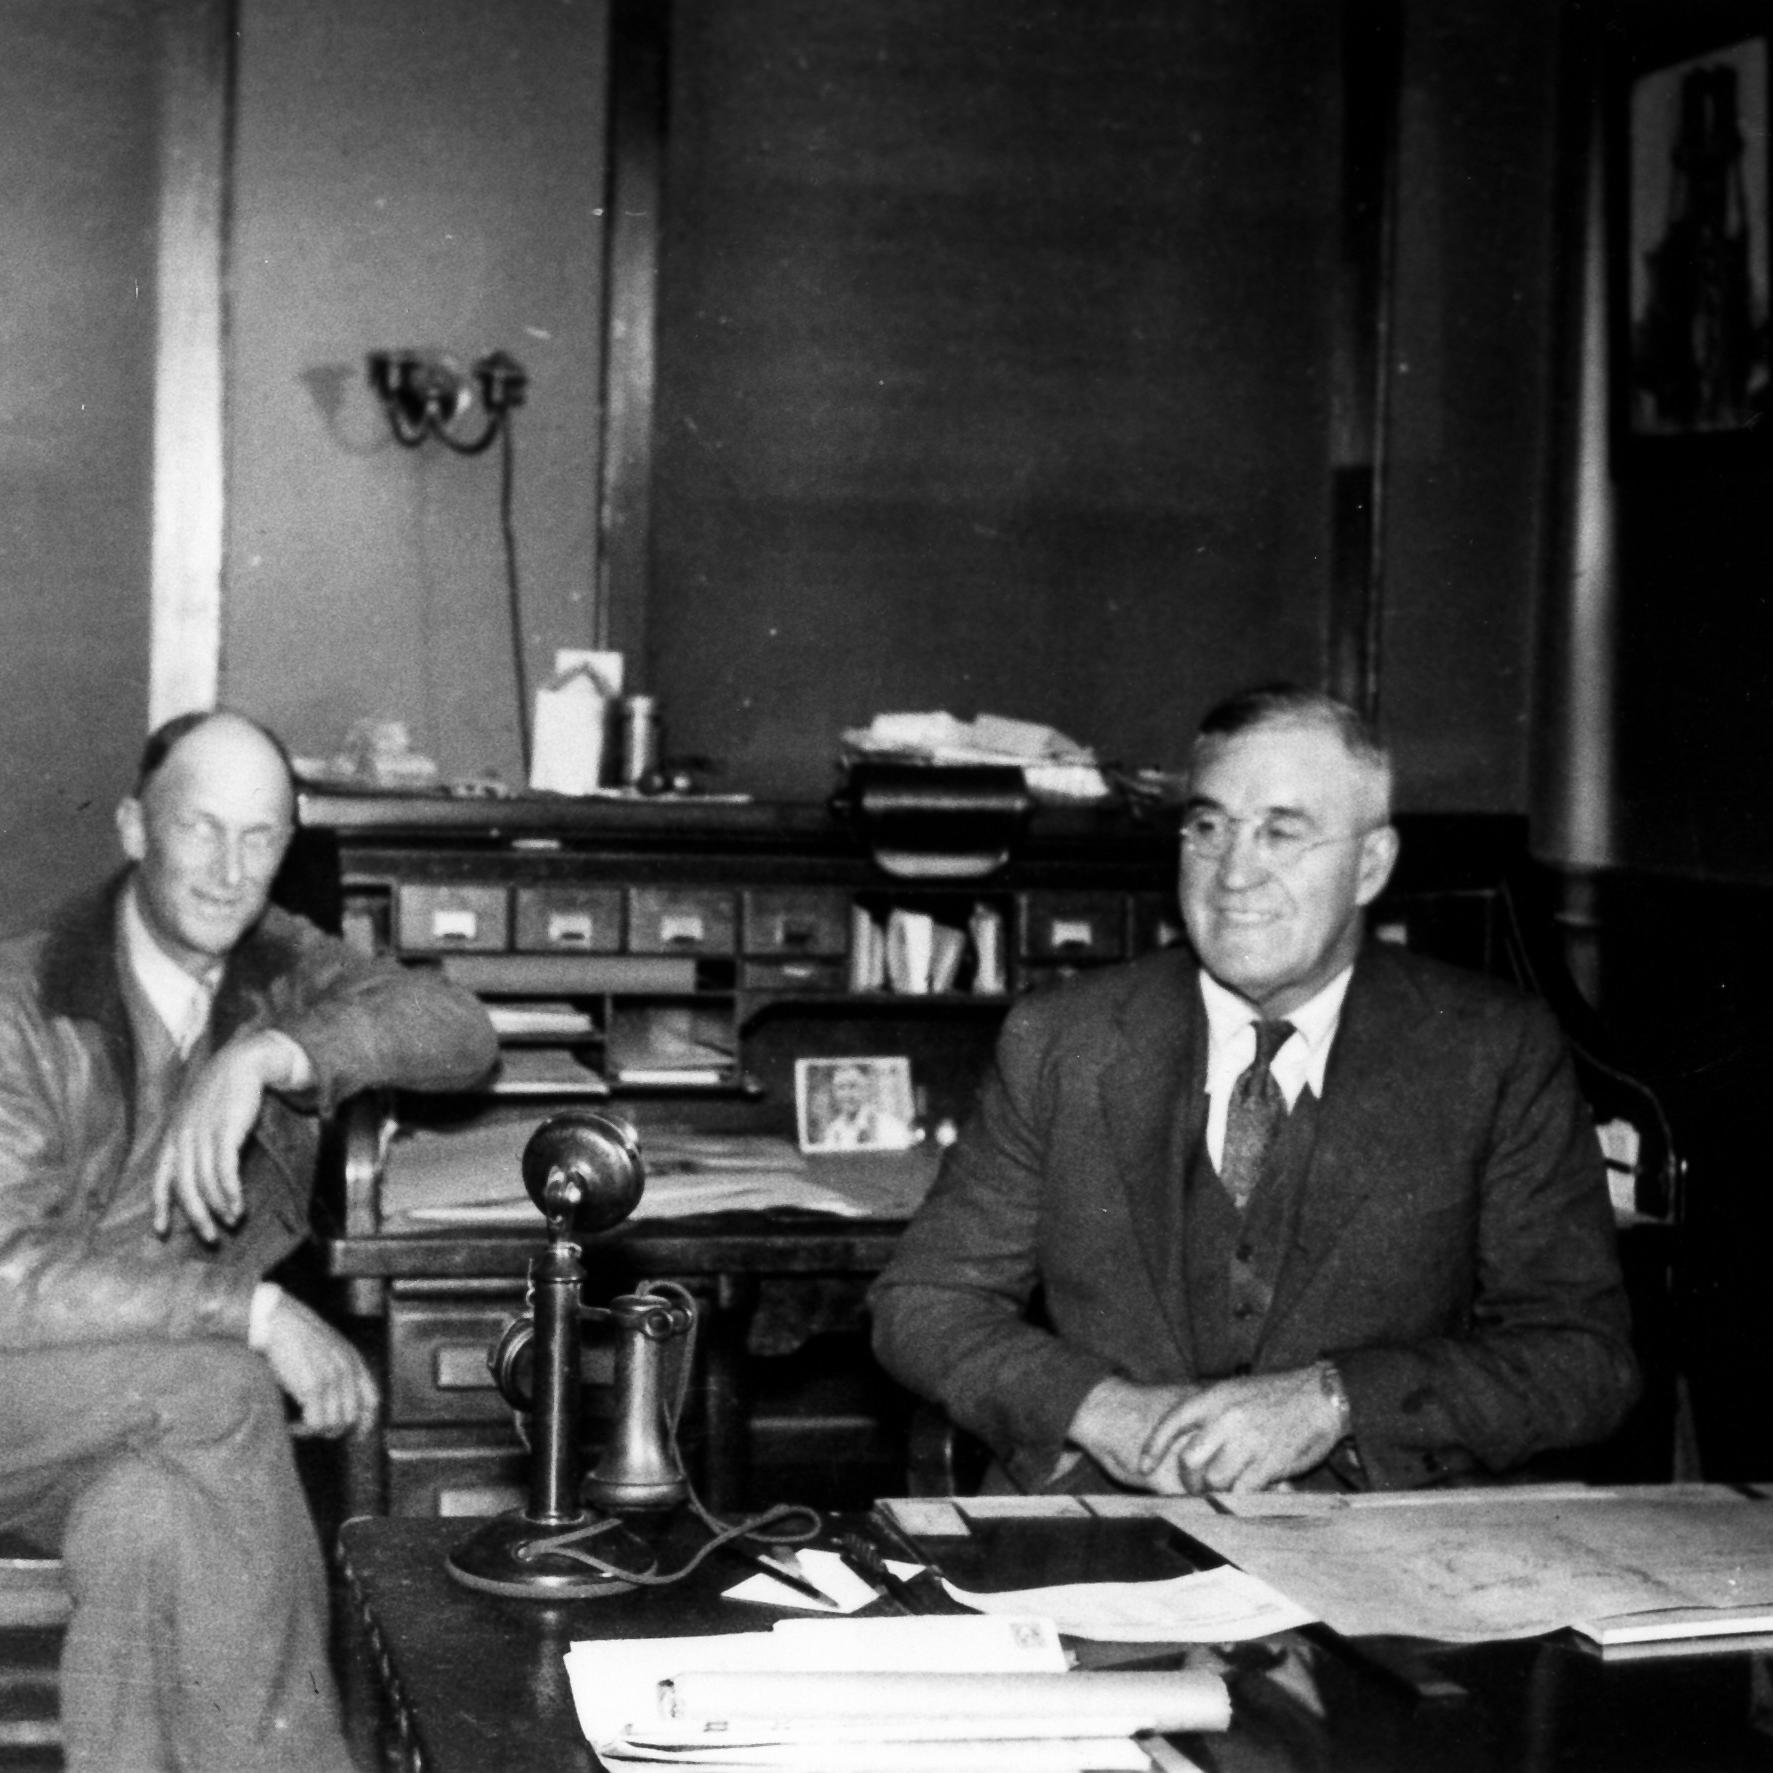 R. G. Smith, left, new manage of Natoma Company, and Lewis Hopfield, previous manager, ca. 1930